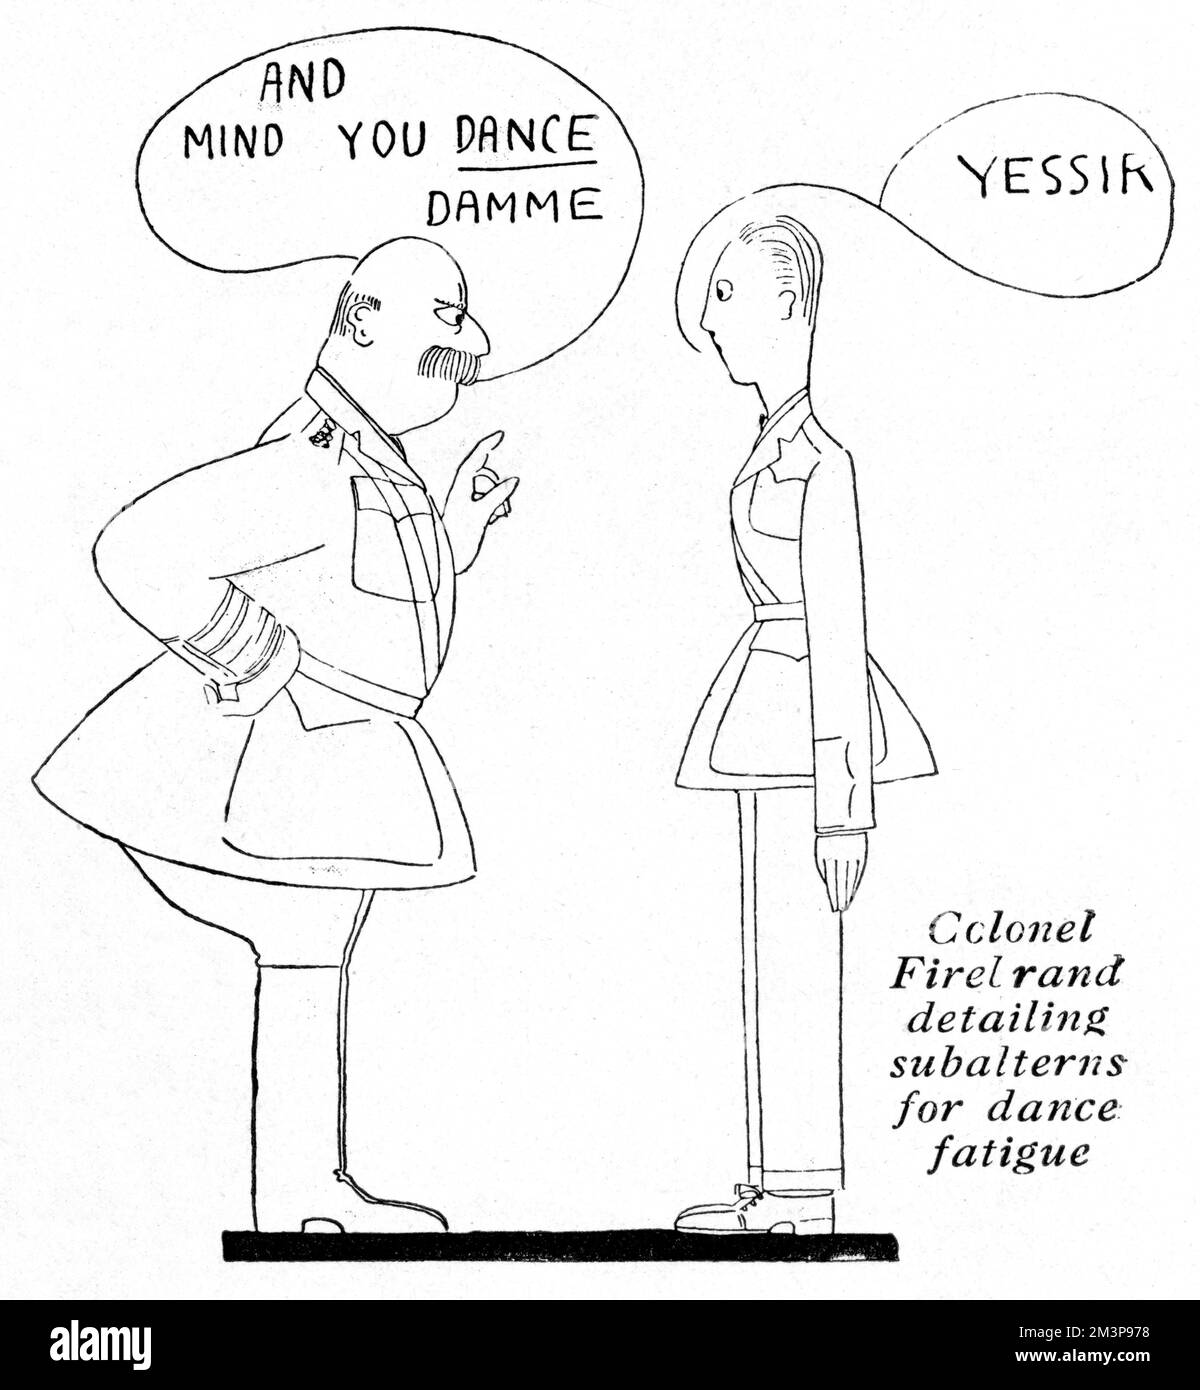 Illustration from the Letters of Eve column in The Tatler showing a young subaltern being told to dance (in no uncertain terms) by his commanding officer, Colonel Firebrand!     Date: 1918 Stock Photo